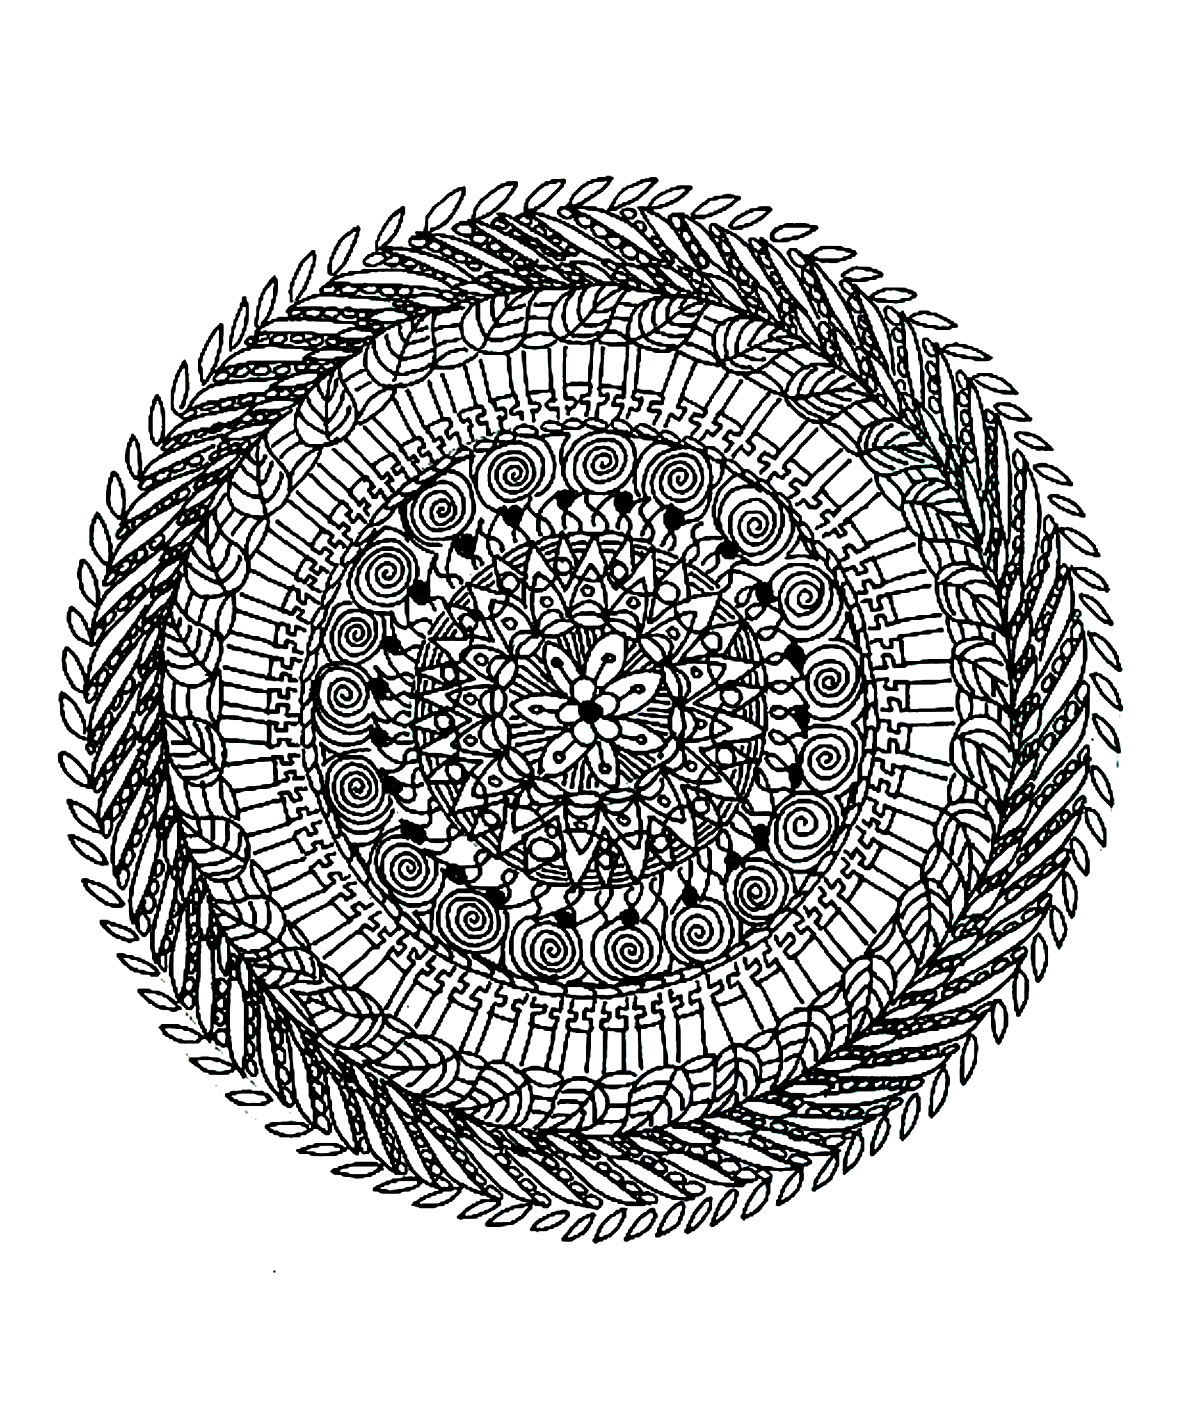 Very dark Mandala drawing with vegetal elements. A luxuriant vegetation invades this magnificent Mandala, give it life without delay. Do whatever it takes to get rid of any distractions that may interfere with your coloring.